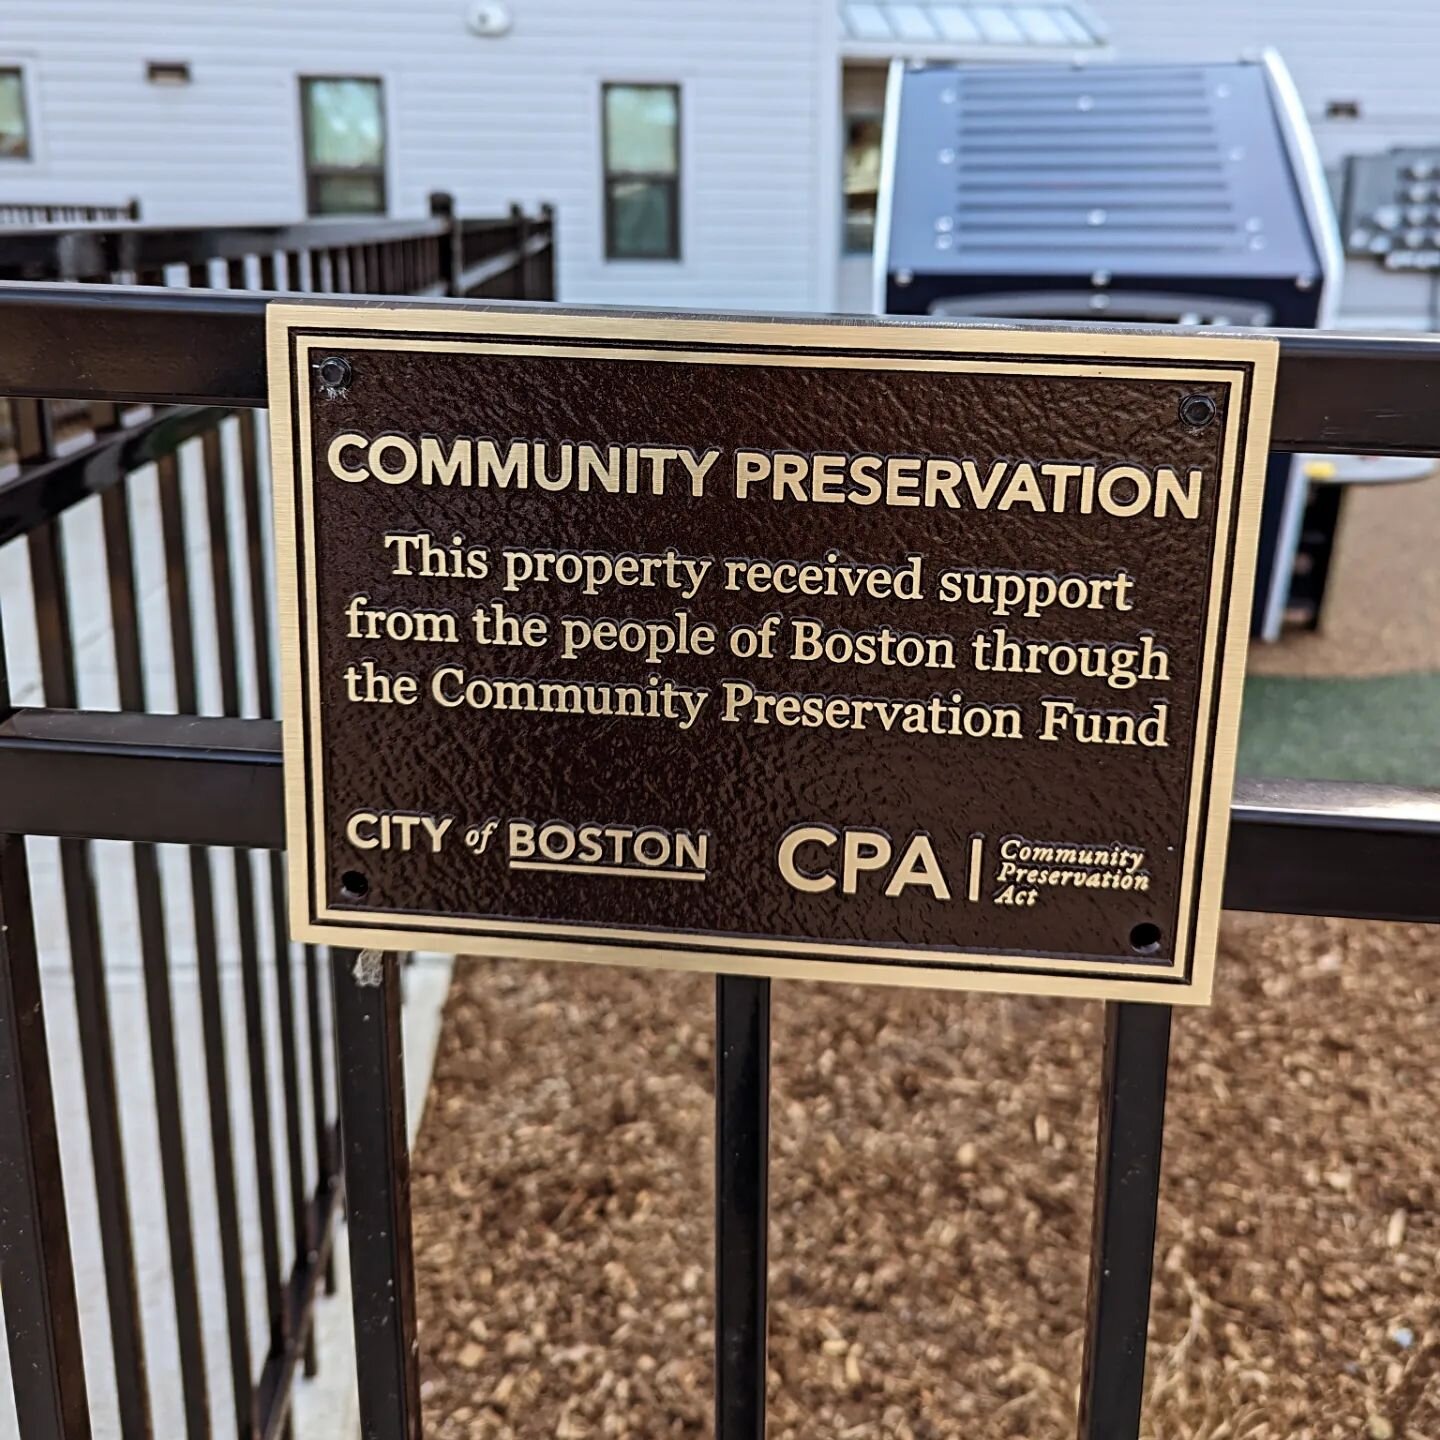 The signs are clear: the playground is ready for use! 

Residents and neighbors of the Planning Office for Urban Affairs &amp; Caribbean Integration Community Development's Cote Village Townhomes in Boston's Mattapan neighborhood are welcome to the n